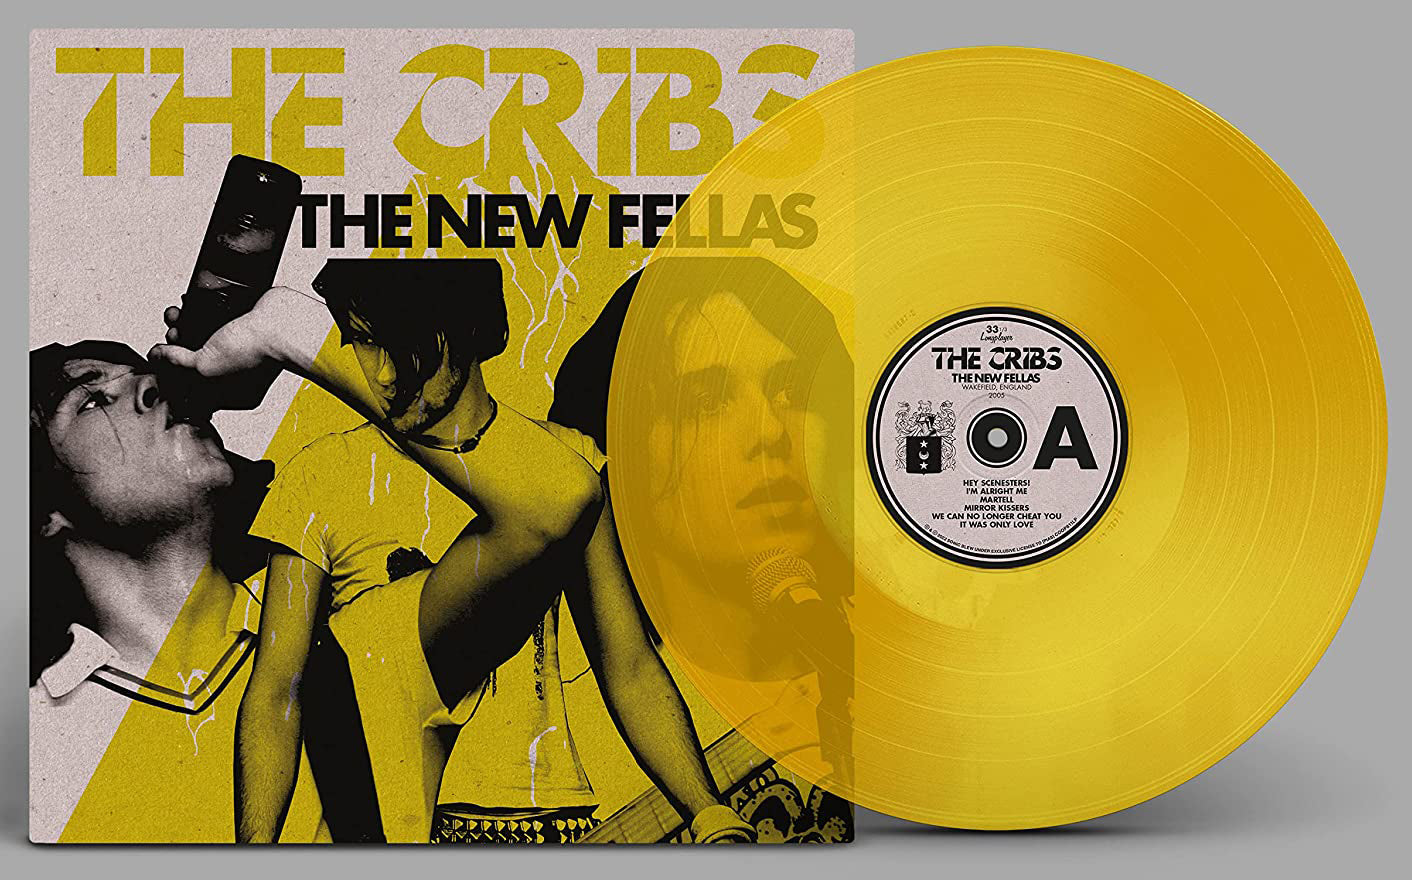 The Cribs The New Fellas Limited Yellow Vinyl LP